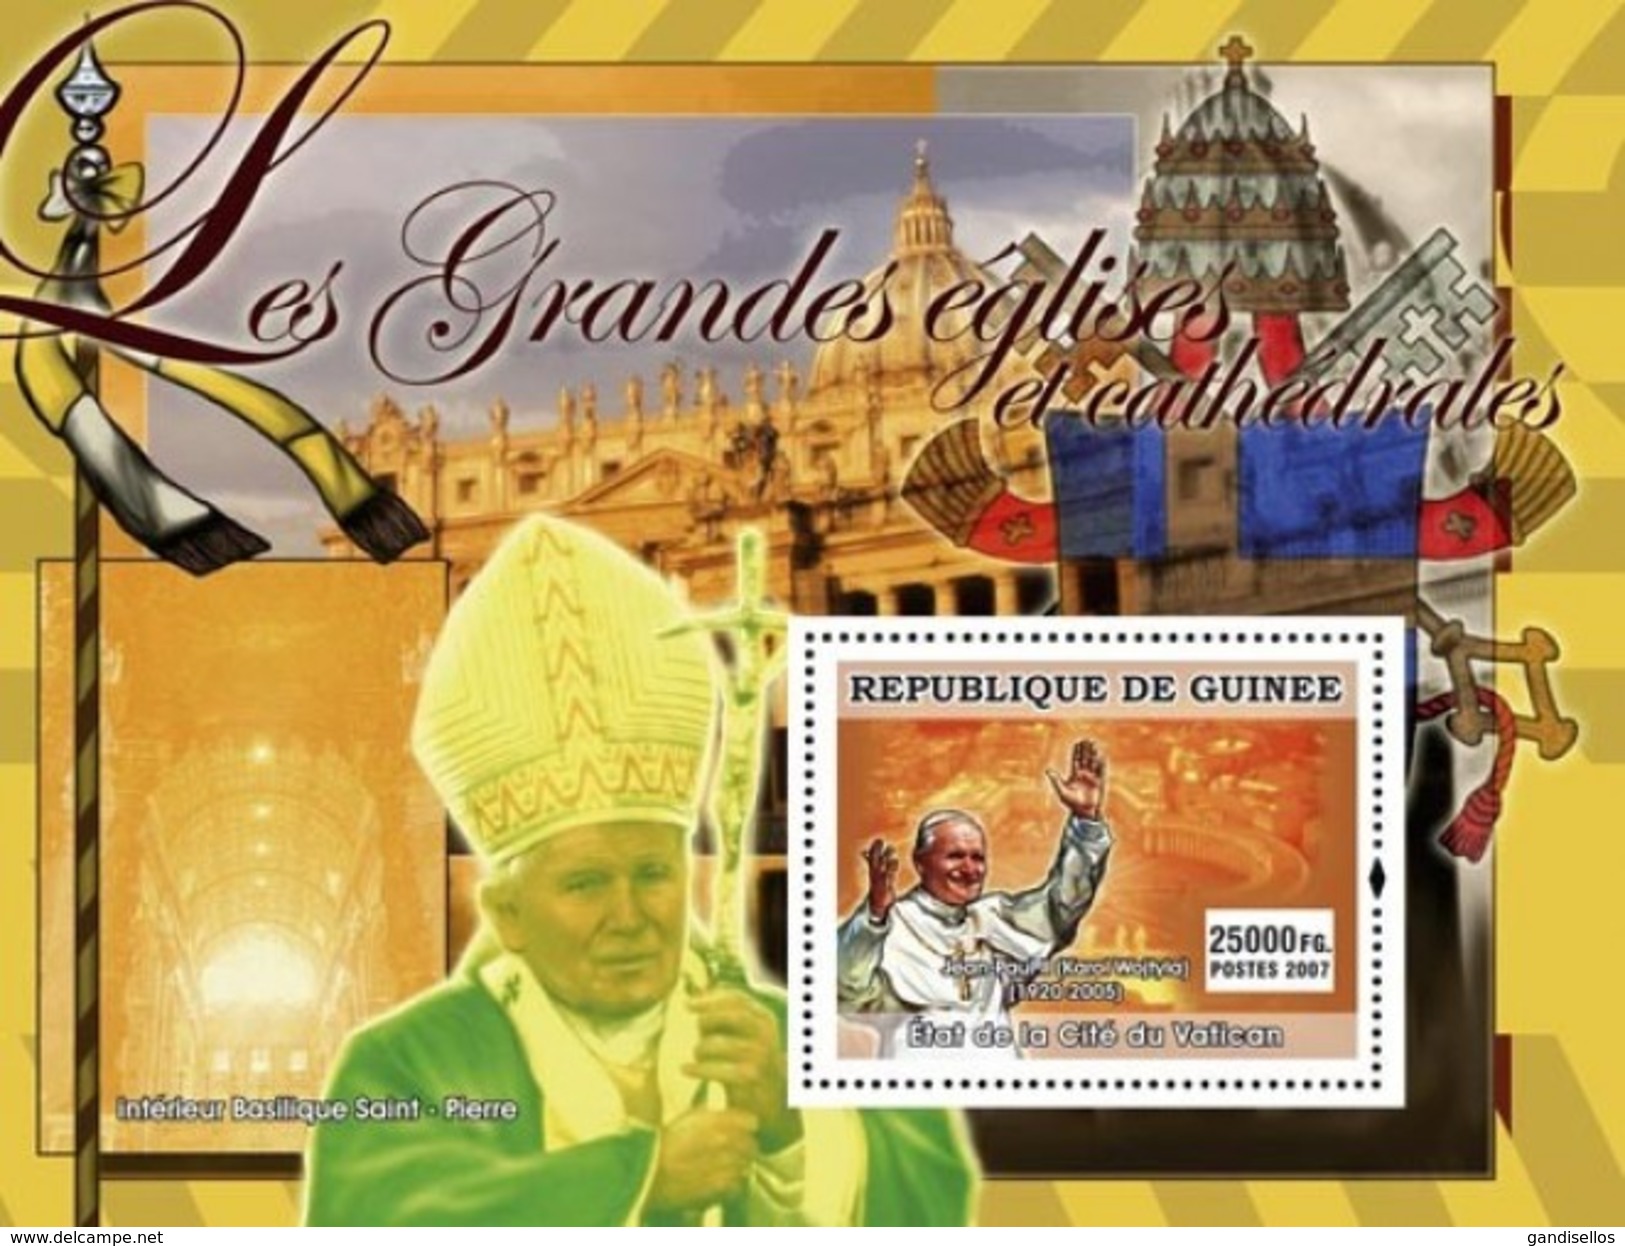 GUINEA 2007 SHEET ART THE GREAT CHURCHES AND CATHEDRALS POPES JOHN PAUL II PAPES JEAN PAUL RELIGION Gu0752b - Guinea (1958-...)